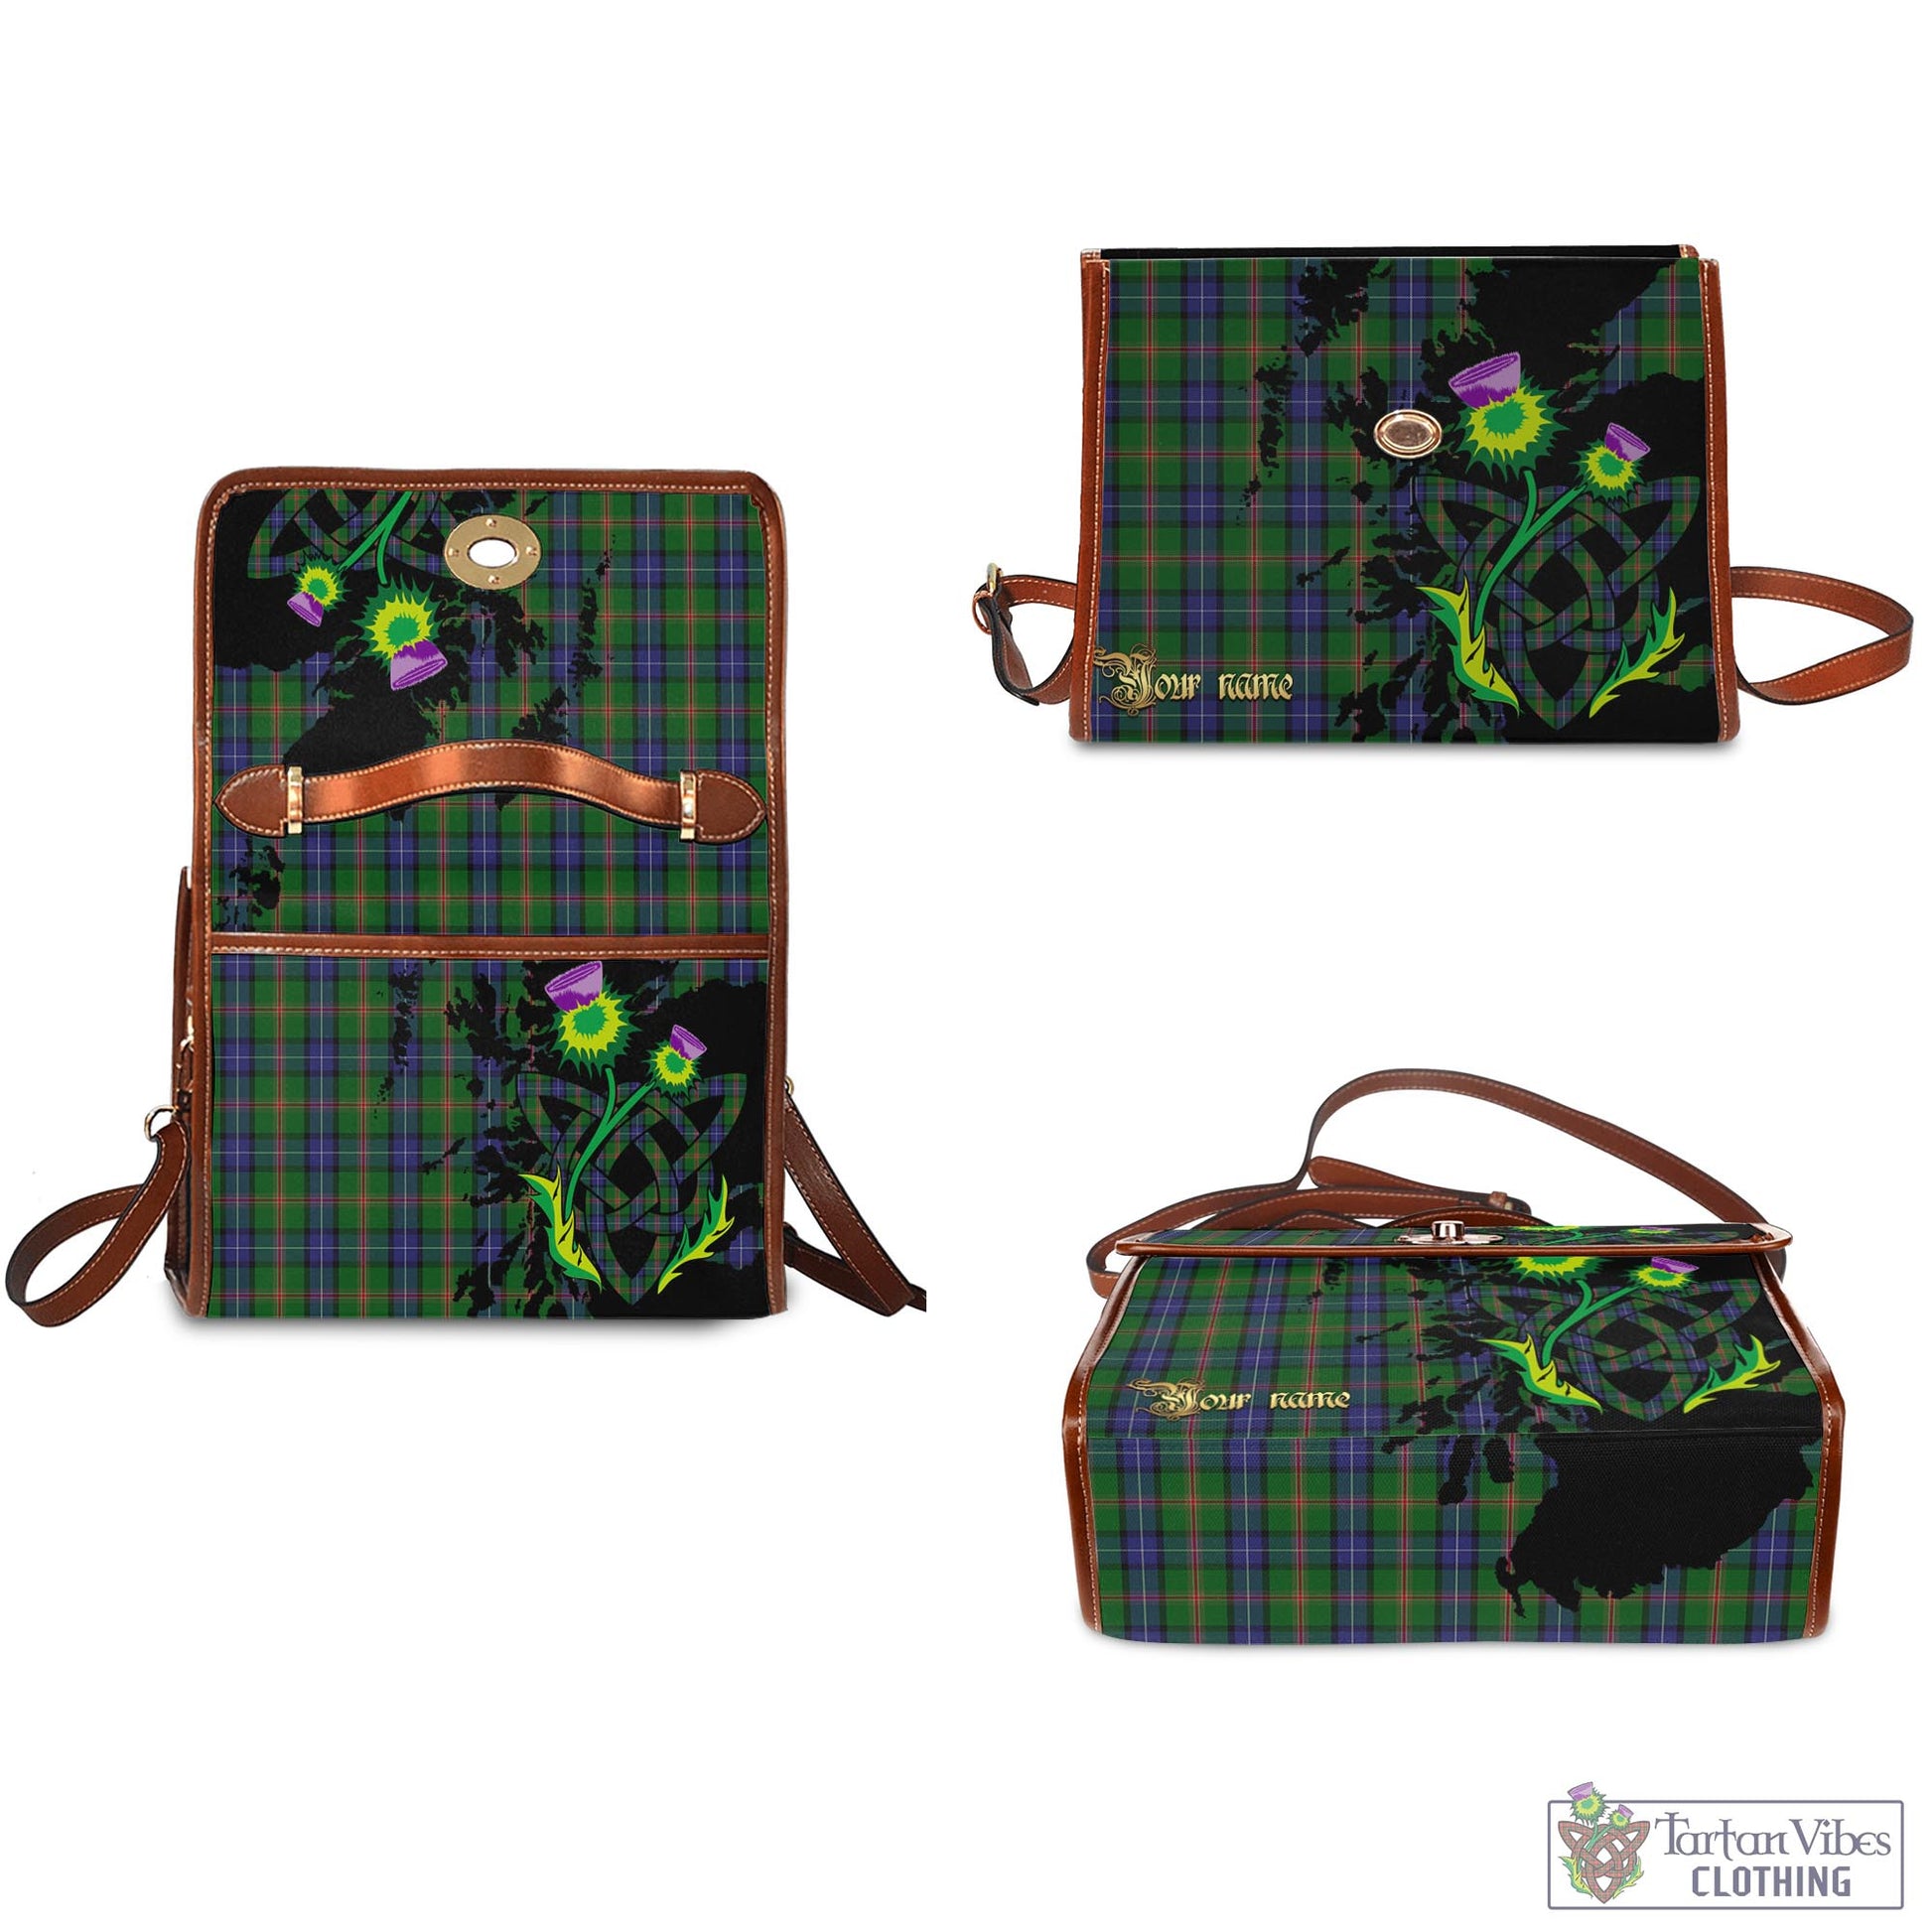 Tartan Vibes Clothing Jones Tartan Waterproof Canvas Bag with Scotland Map and Thistle Celtic Accents